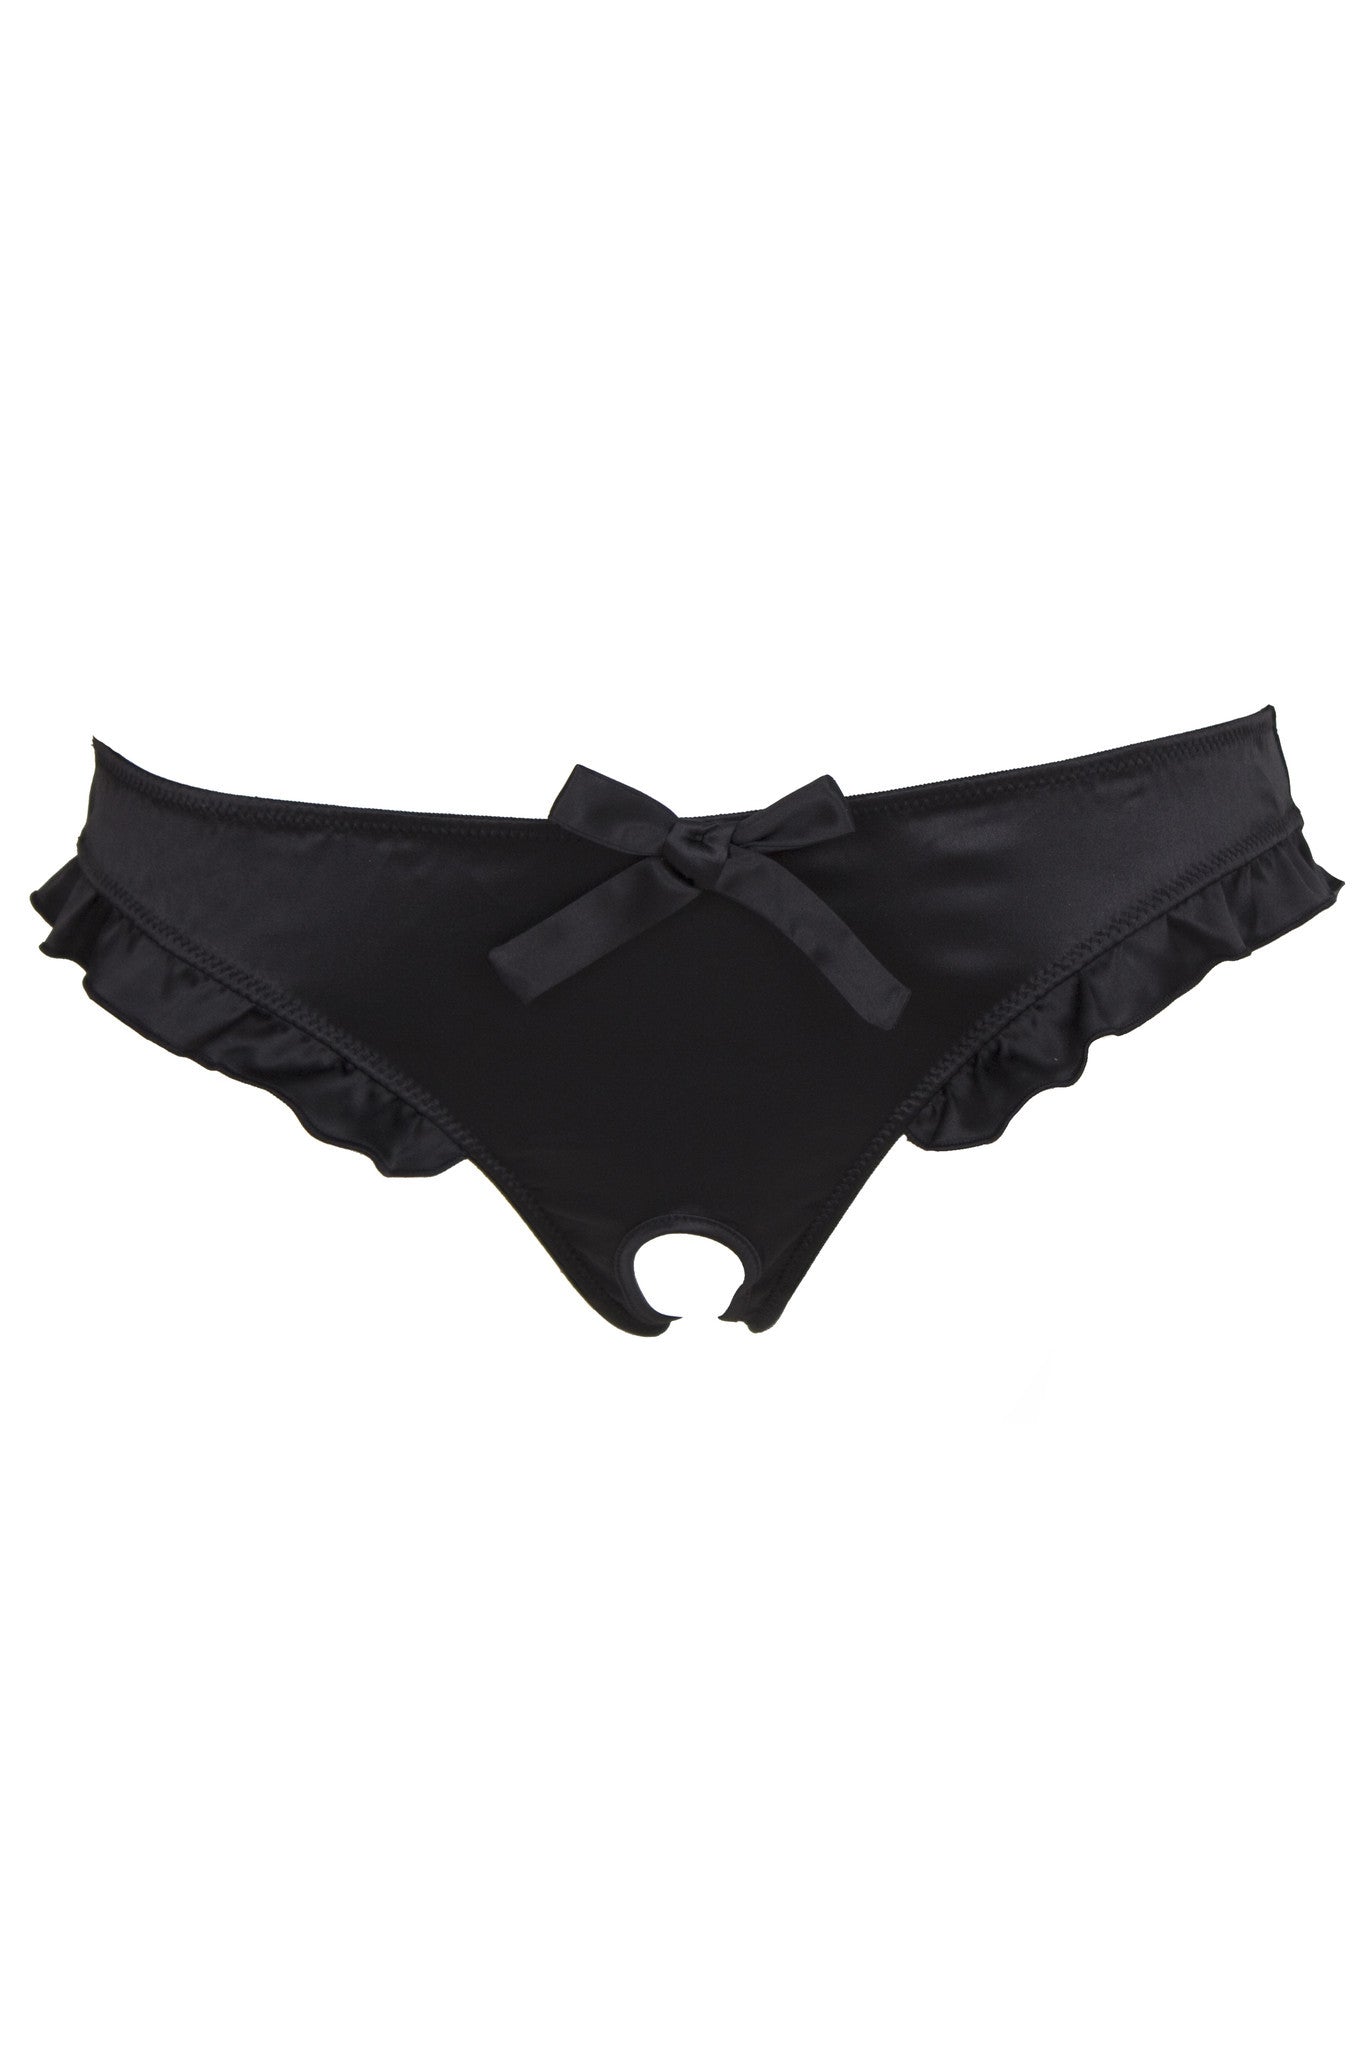 frilly ouvert crotchless open knickers satin black brief